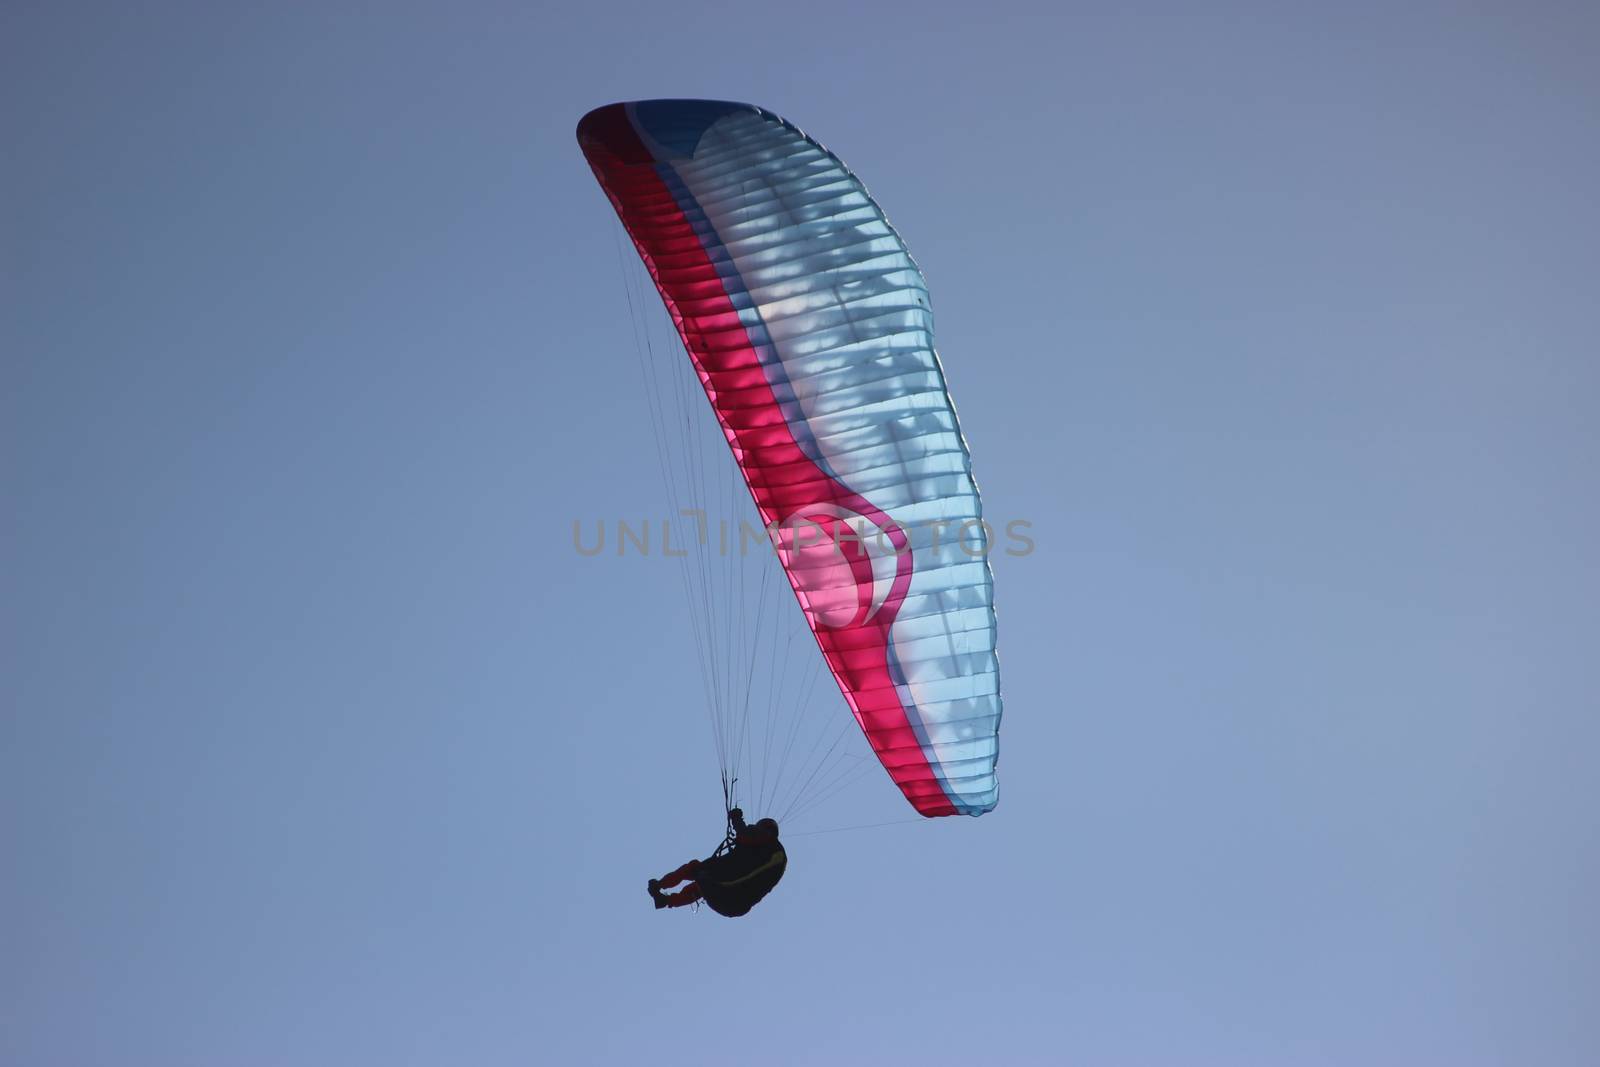 Paraglider Flying On Clear Blue Sky Background